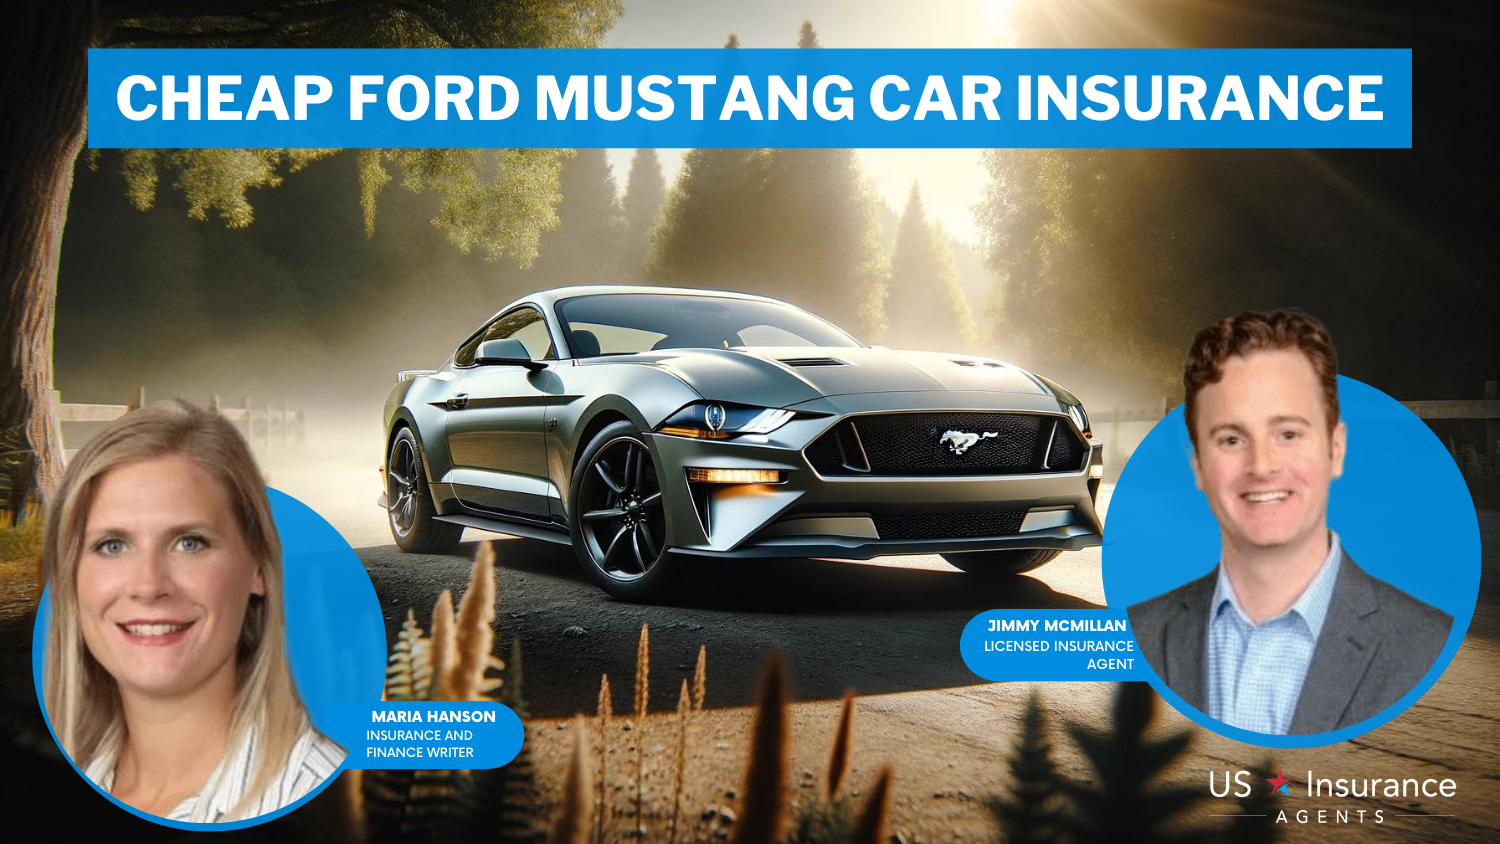 Cheap Ford Mustang Car Insurance: Travelers, AAA, Allstate